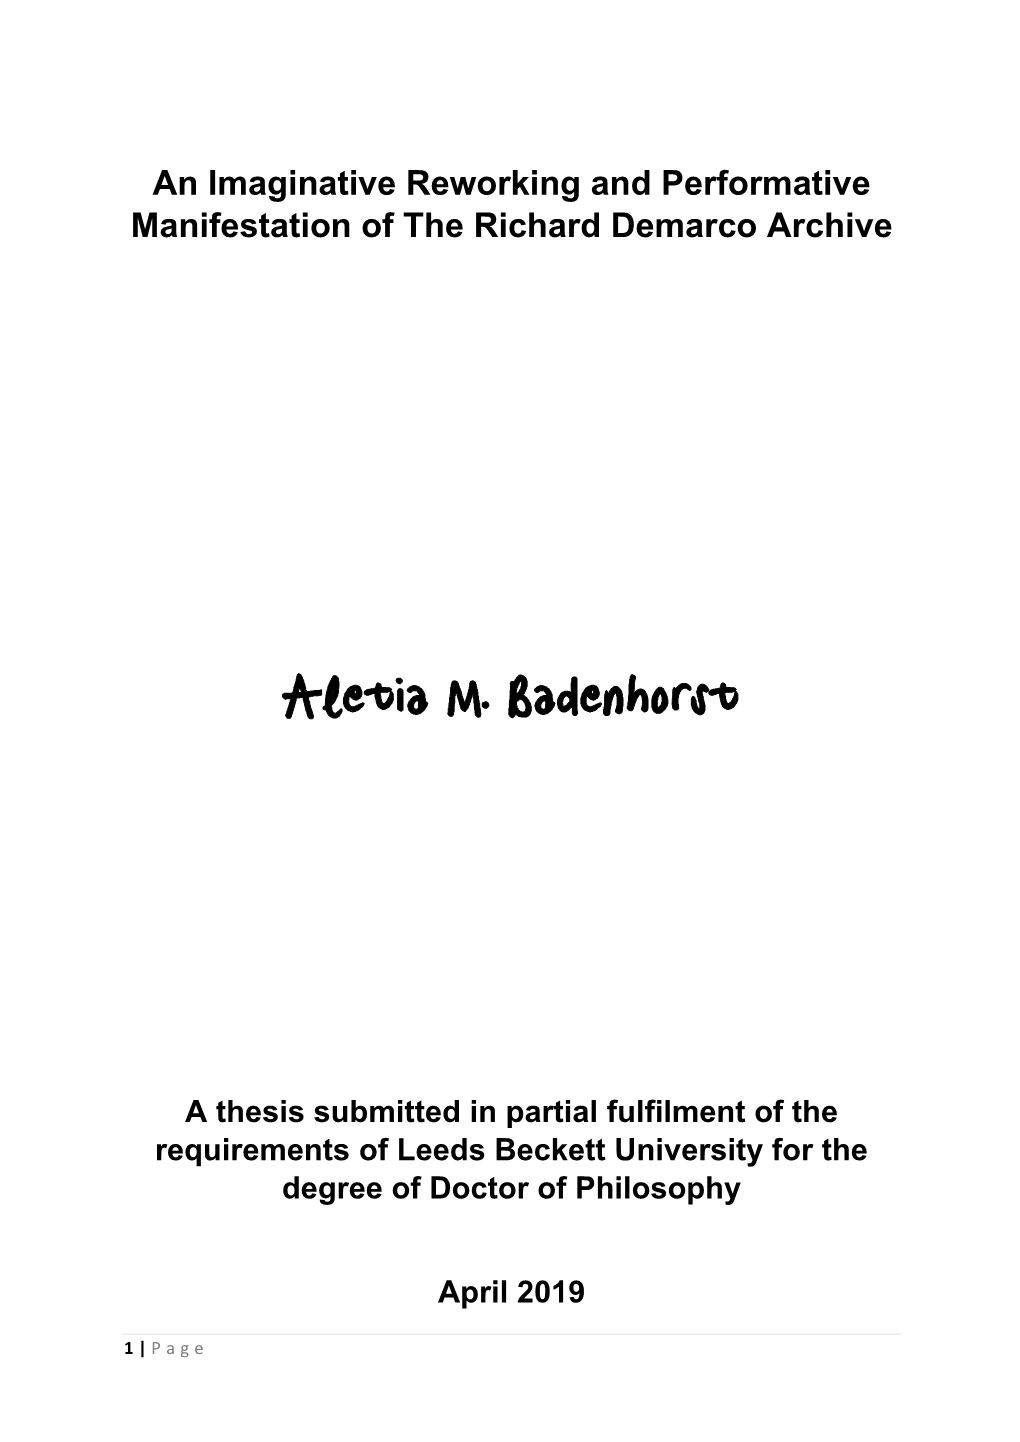 An Imaginative Reworking and Performative Manifestation of the Richard Demarco Archive